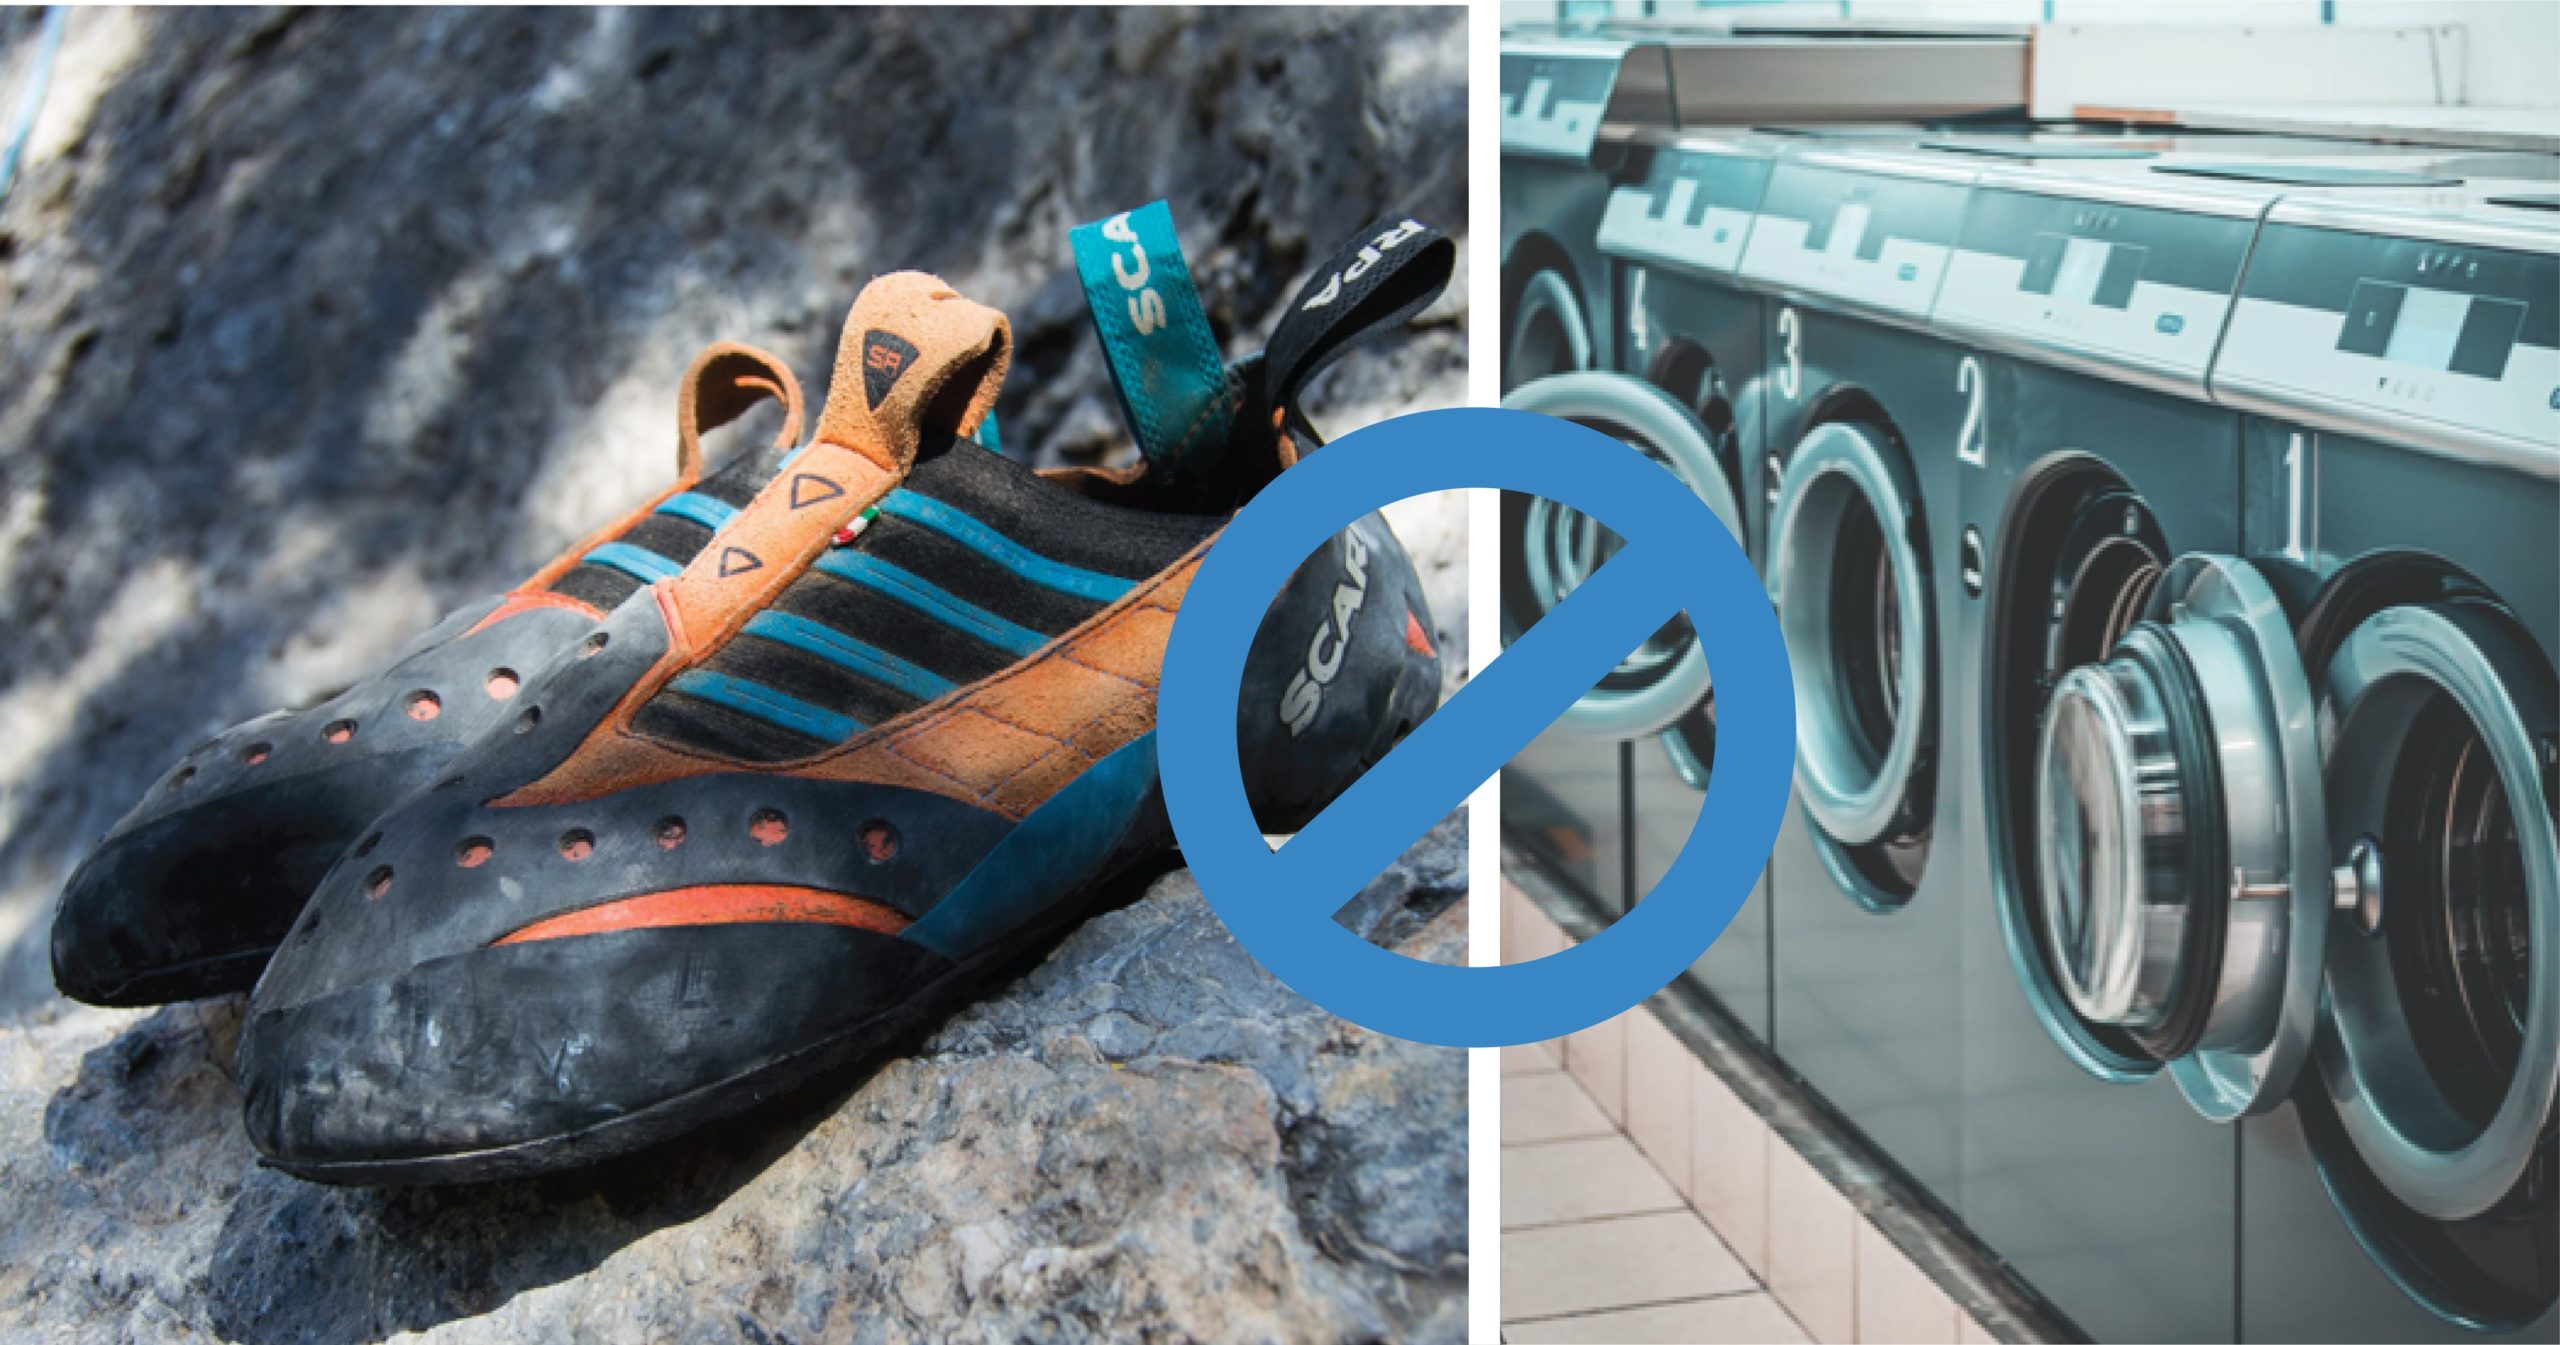 Can I put climbing shoes in the dryer?